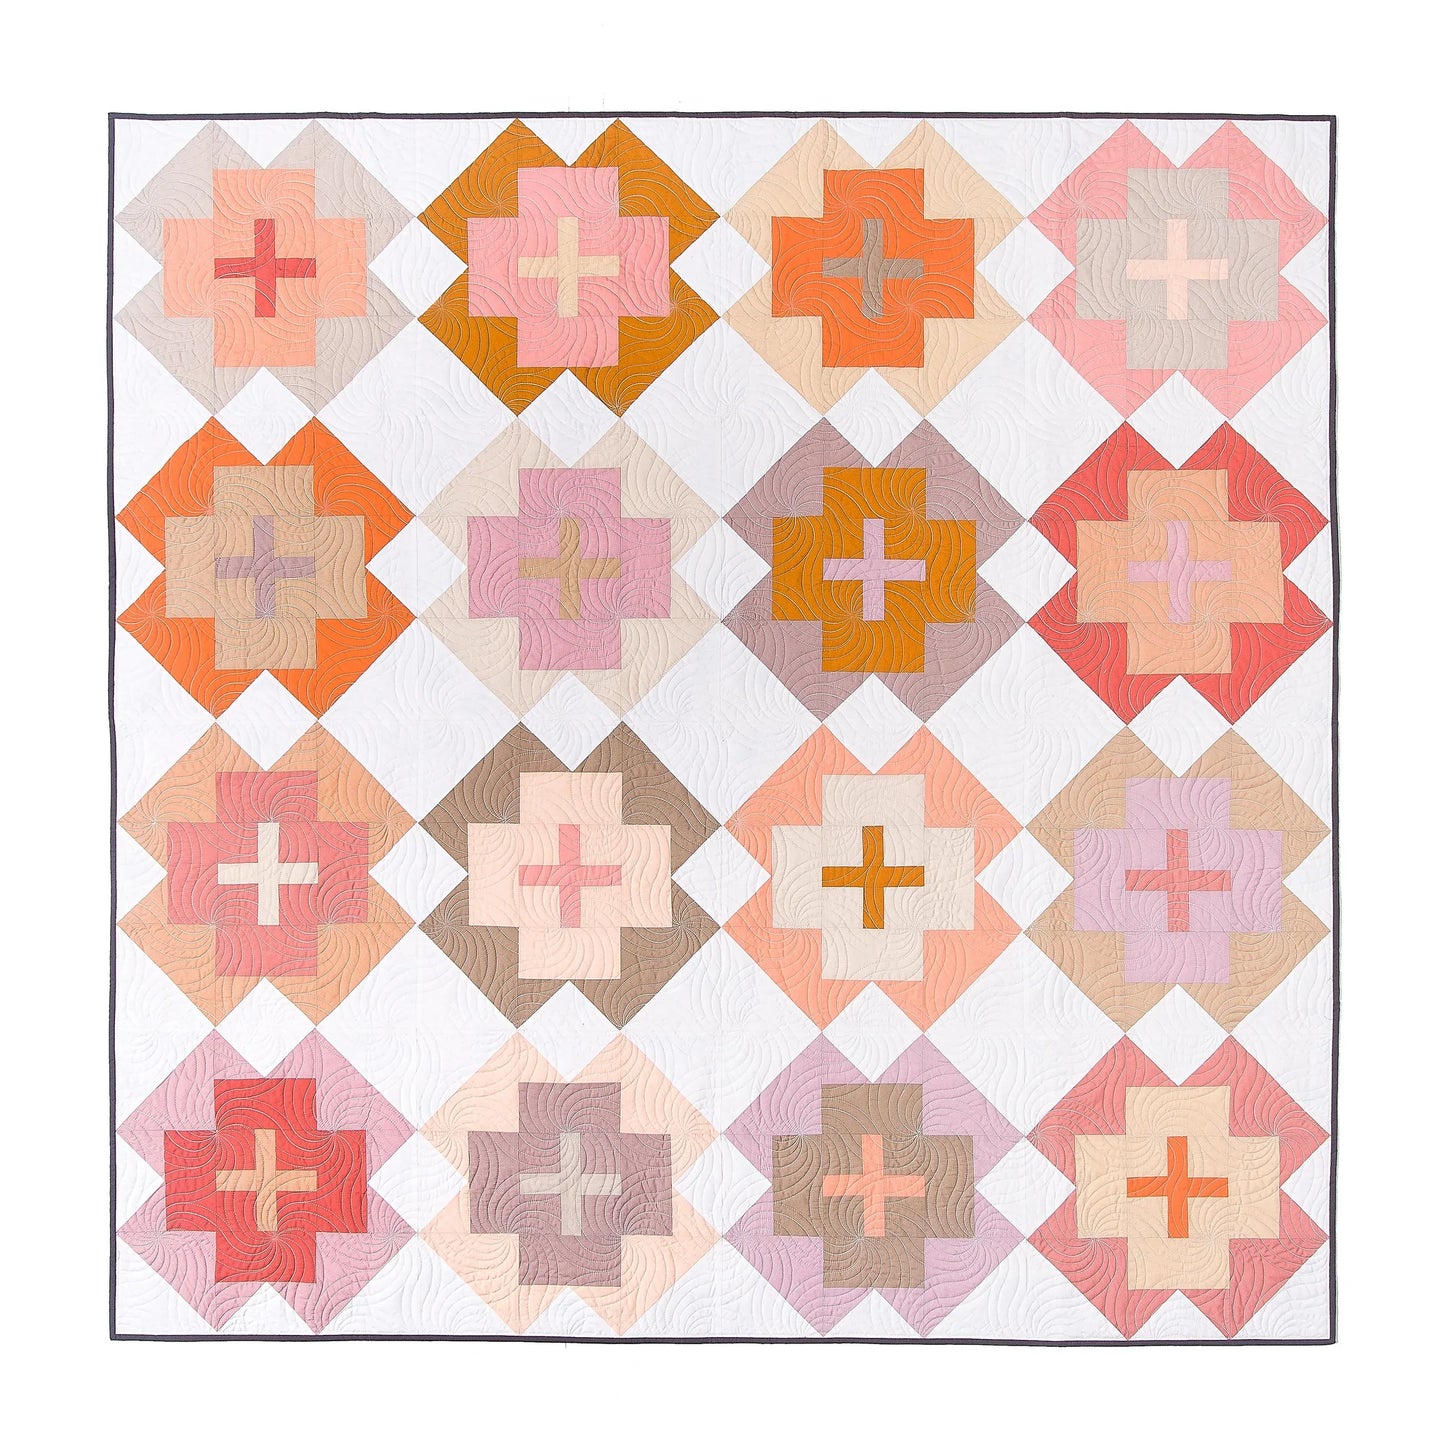 Nightingale Quilt Pattern - Lo and Behold Stitchery